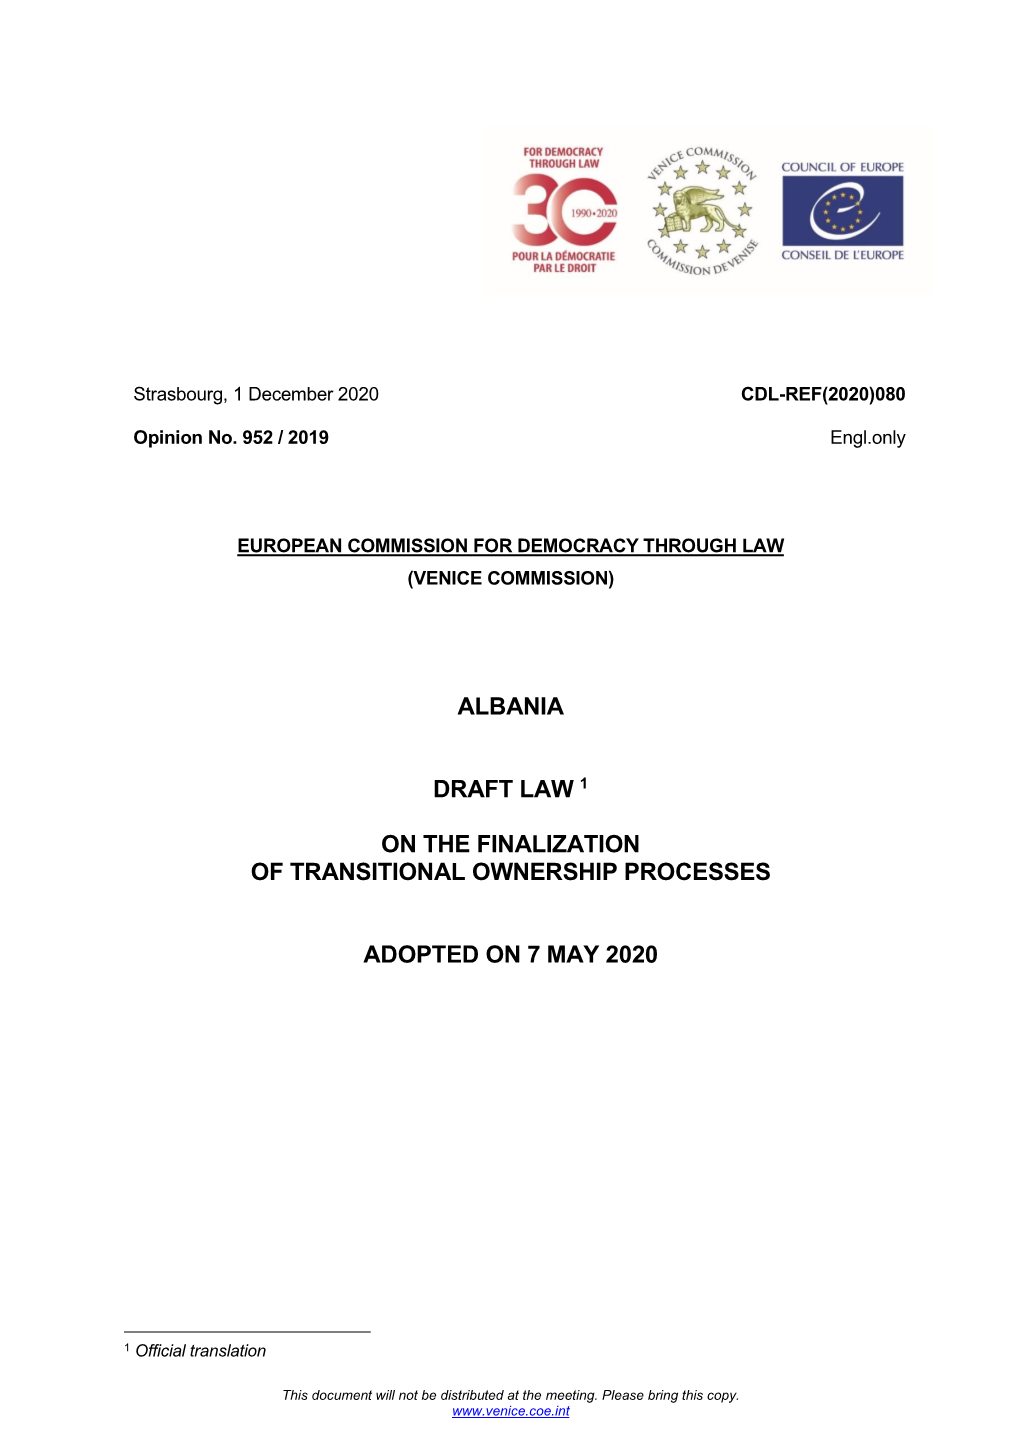 Albania Draft Law 1 on the Finalization of Transitional